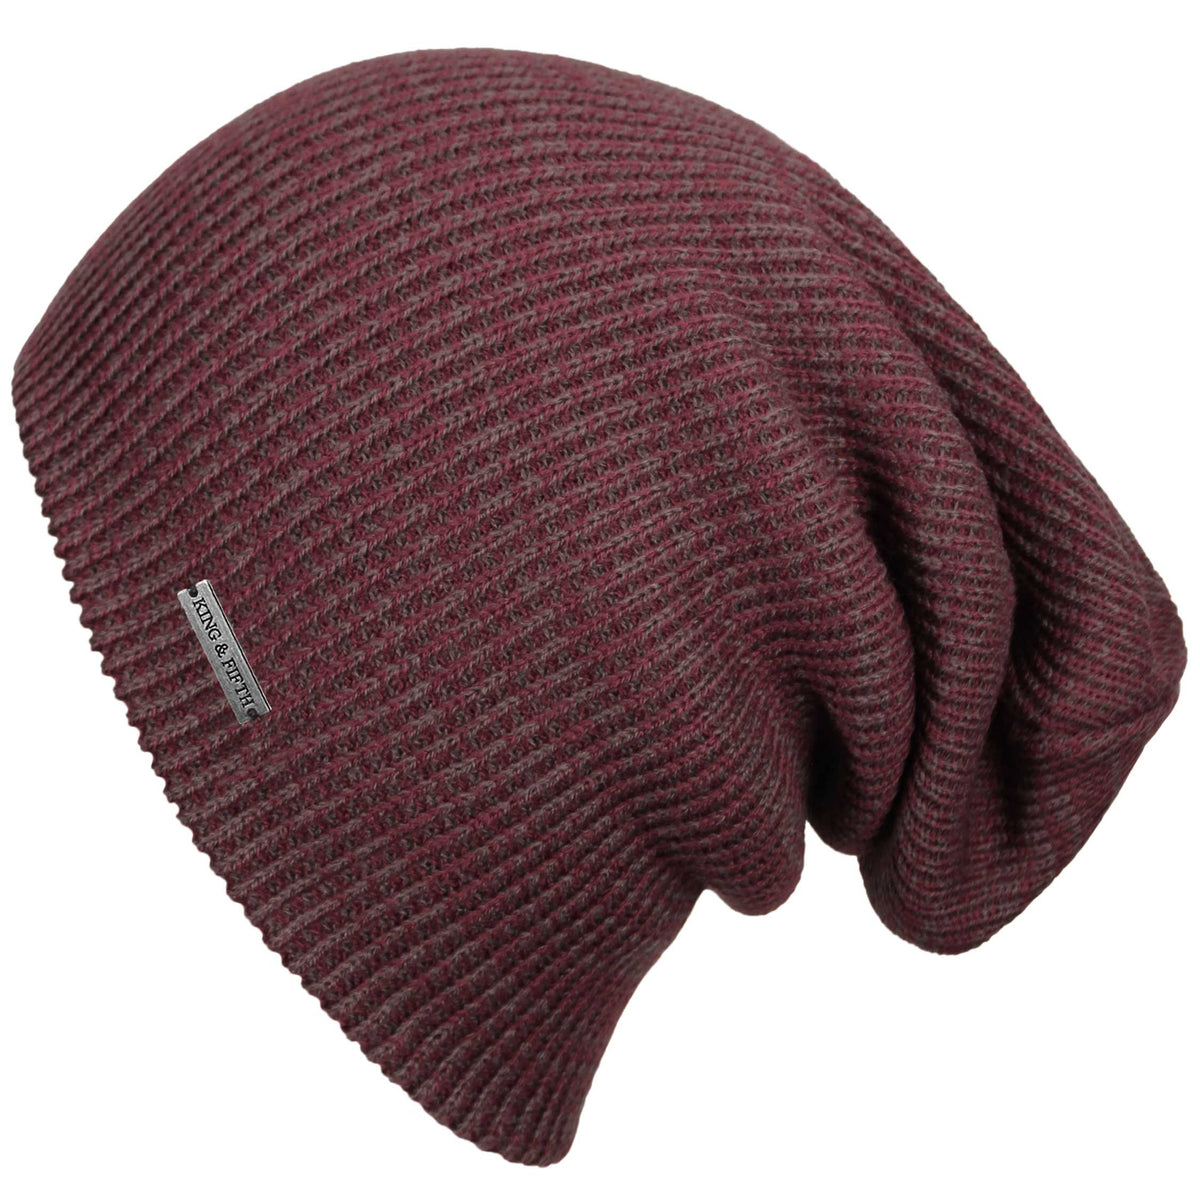 Fifth - Beanie - King Beanie Oversized Slouchy and Womens - Supply The Forte Slouchy